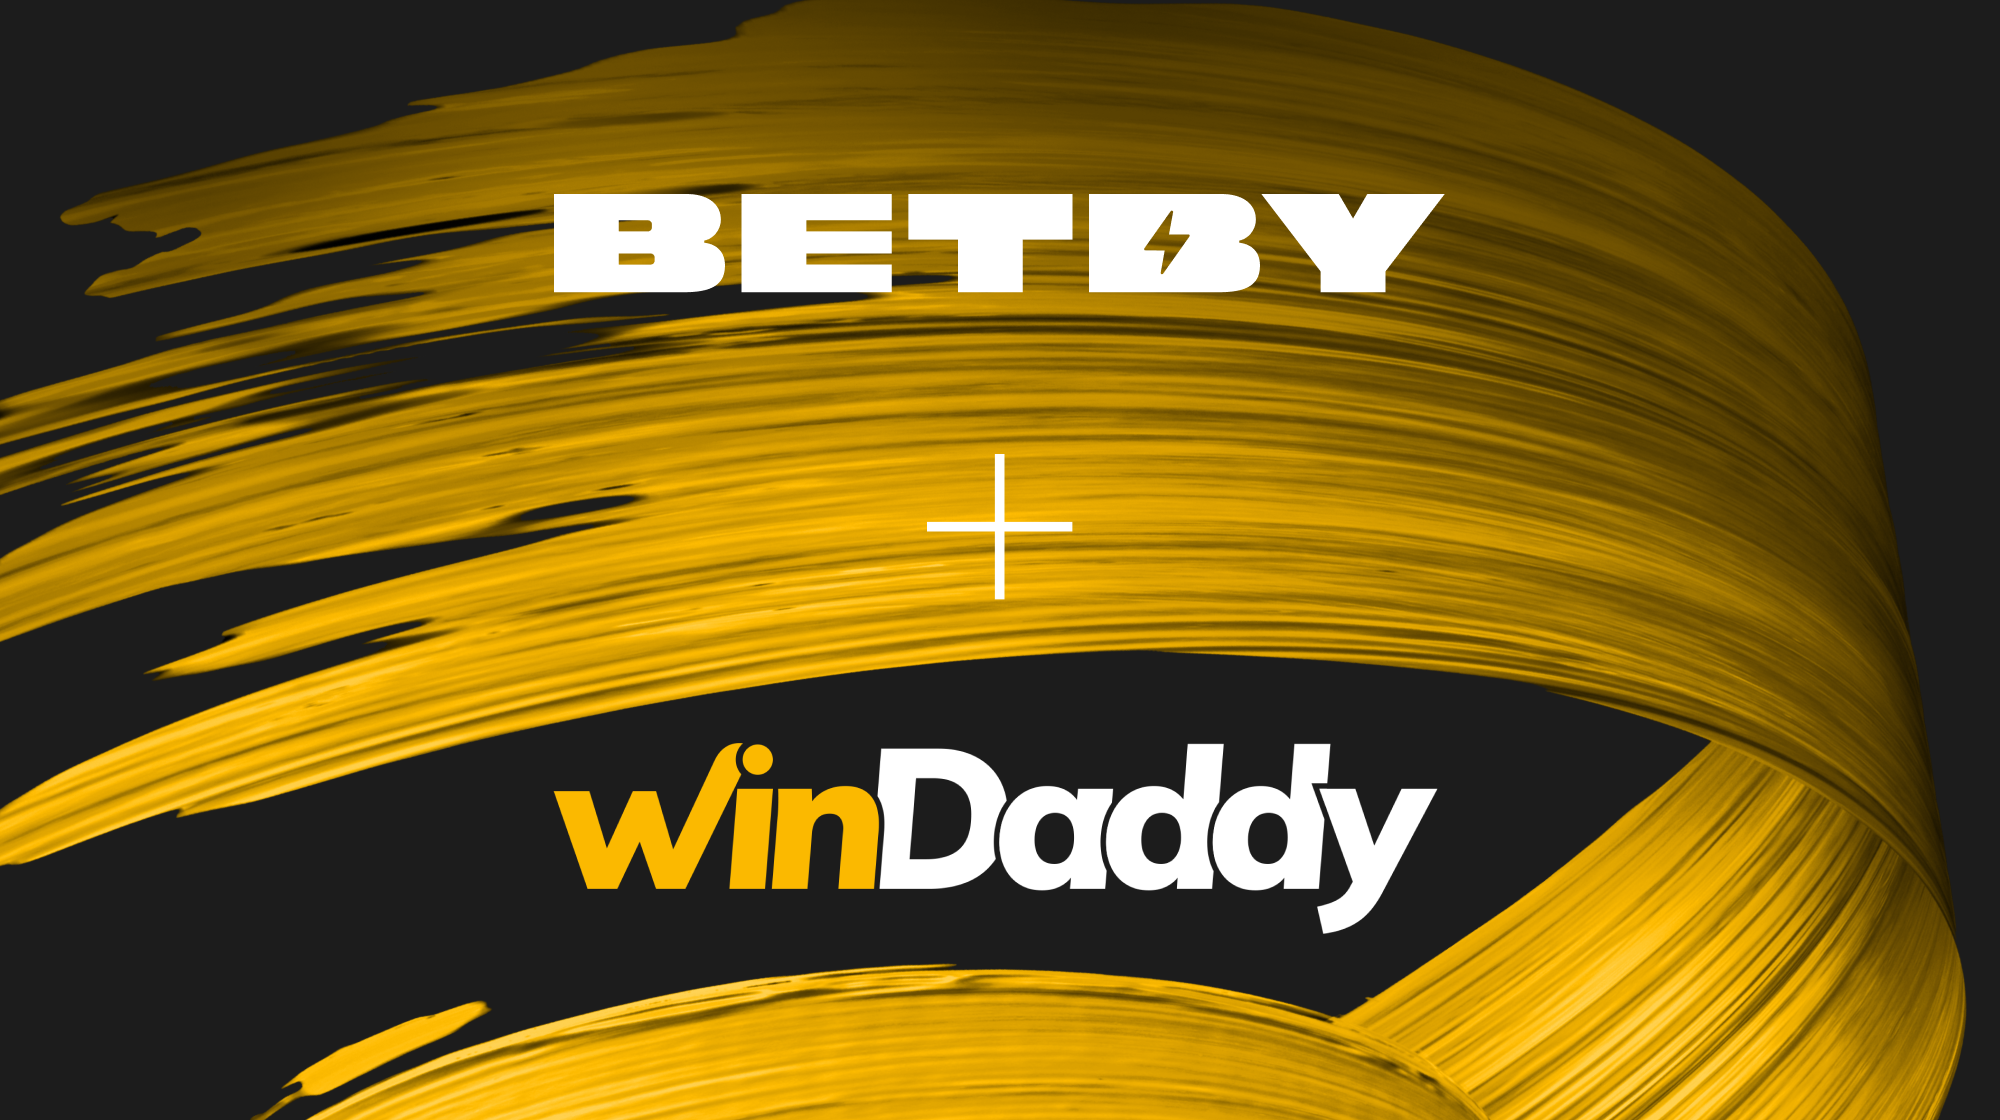 BETBY TAKES FULL SOLUTION LIVE WITH WINDADDY